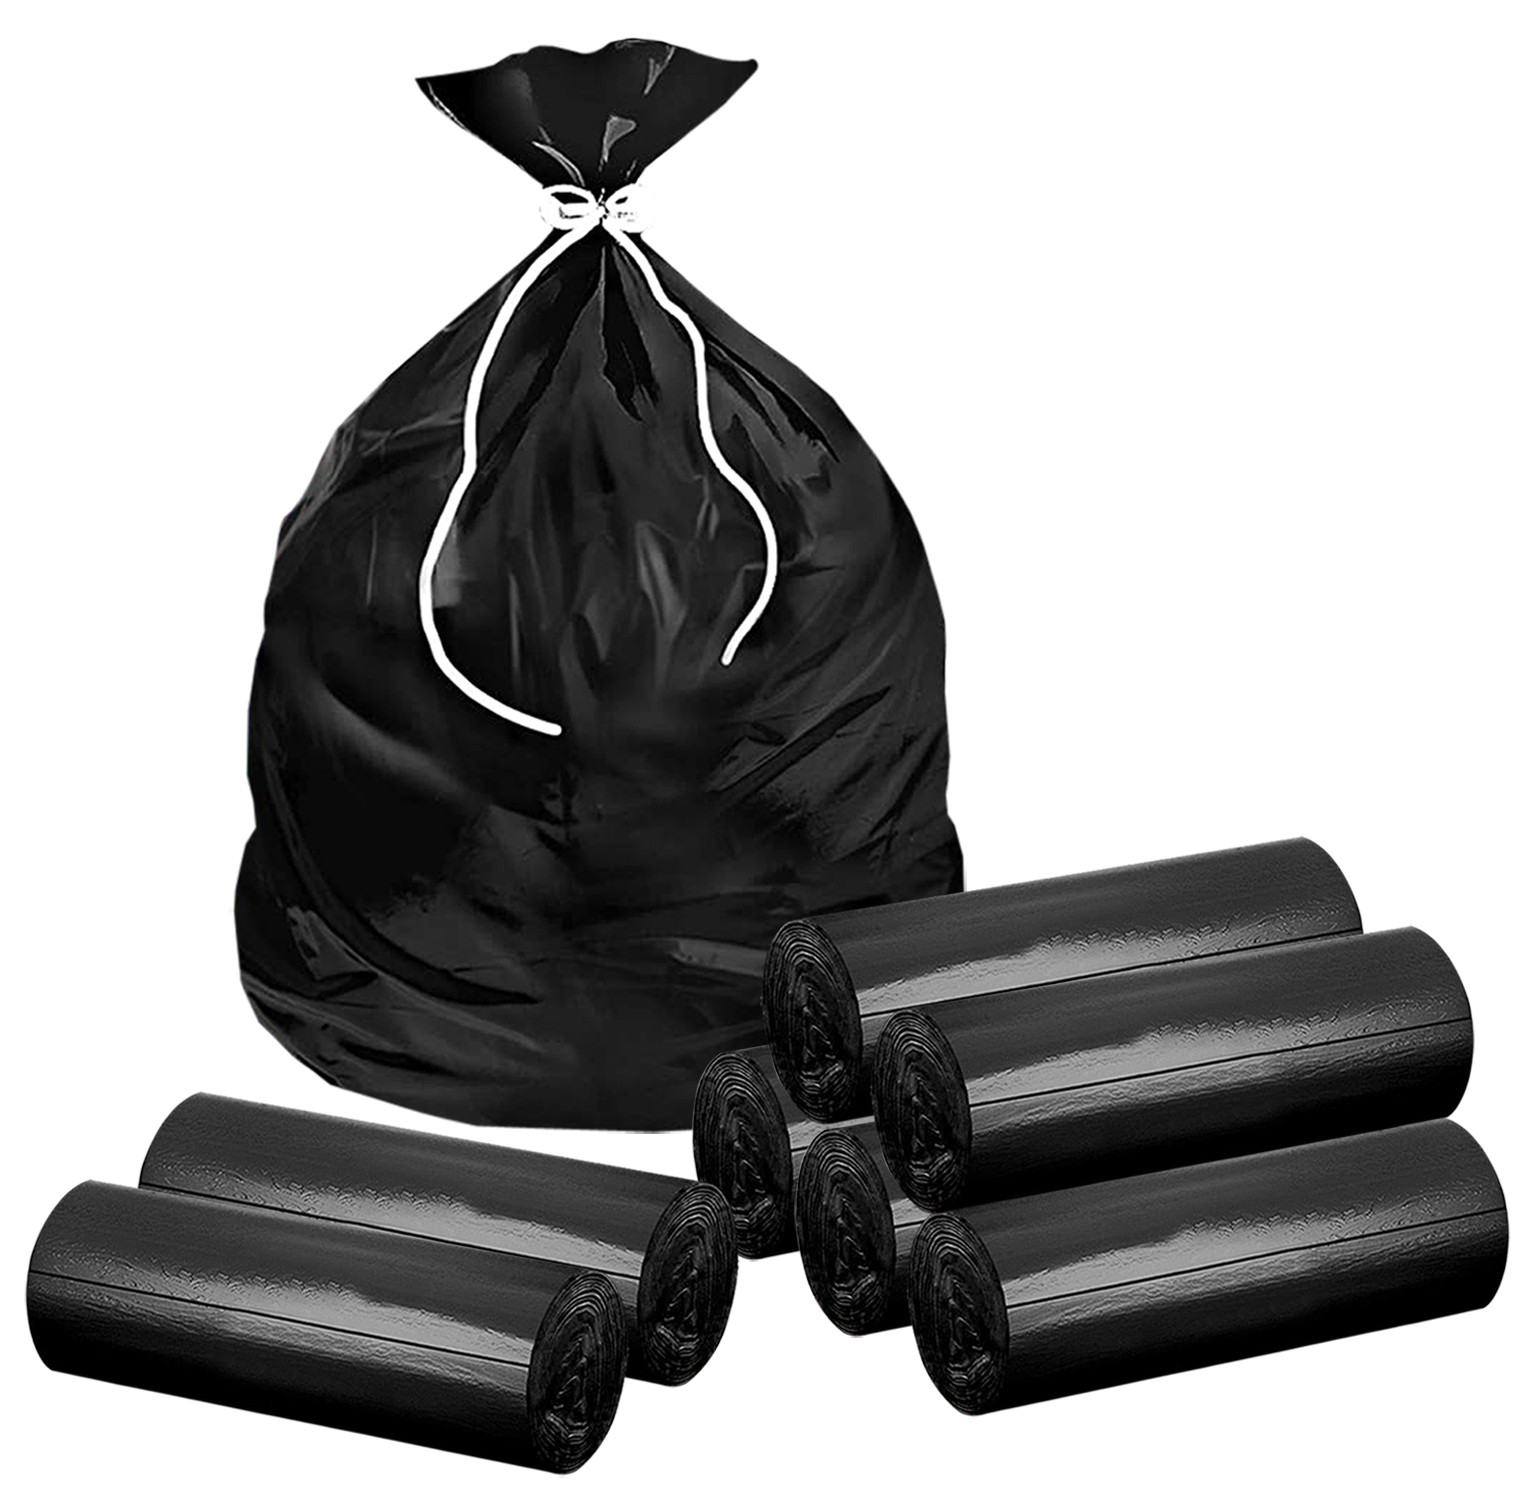 Kuber Industries Large Biodegradable Garbage Bags, Dustbin Bags, Trash Bags For Kitchen, Office, Warehouse, Pantry or Washroom, 24x30 Inches (Black)-HS41KUBMART24040